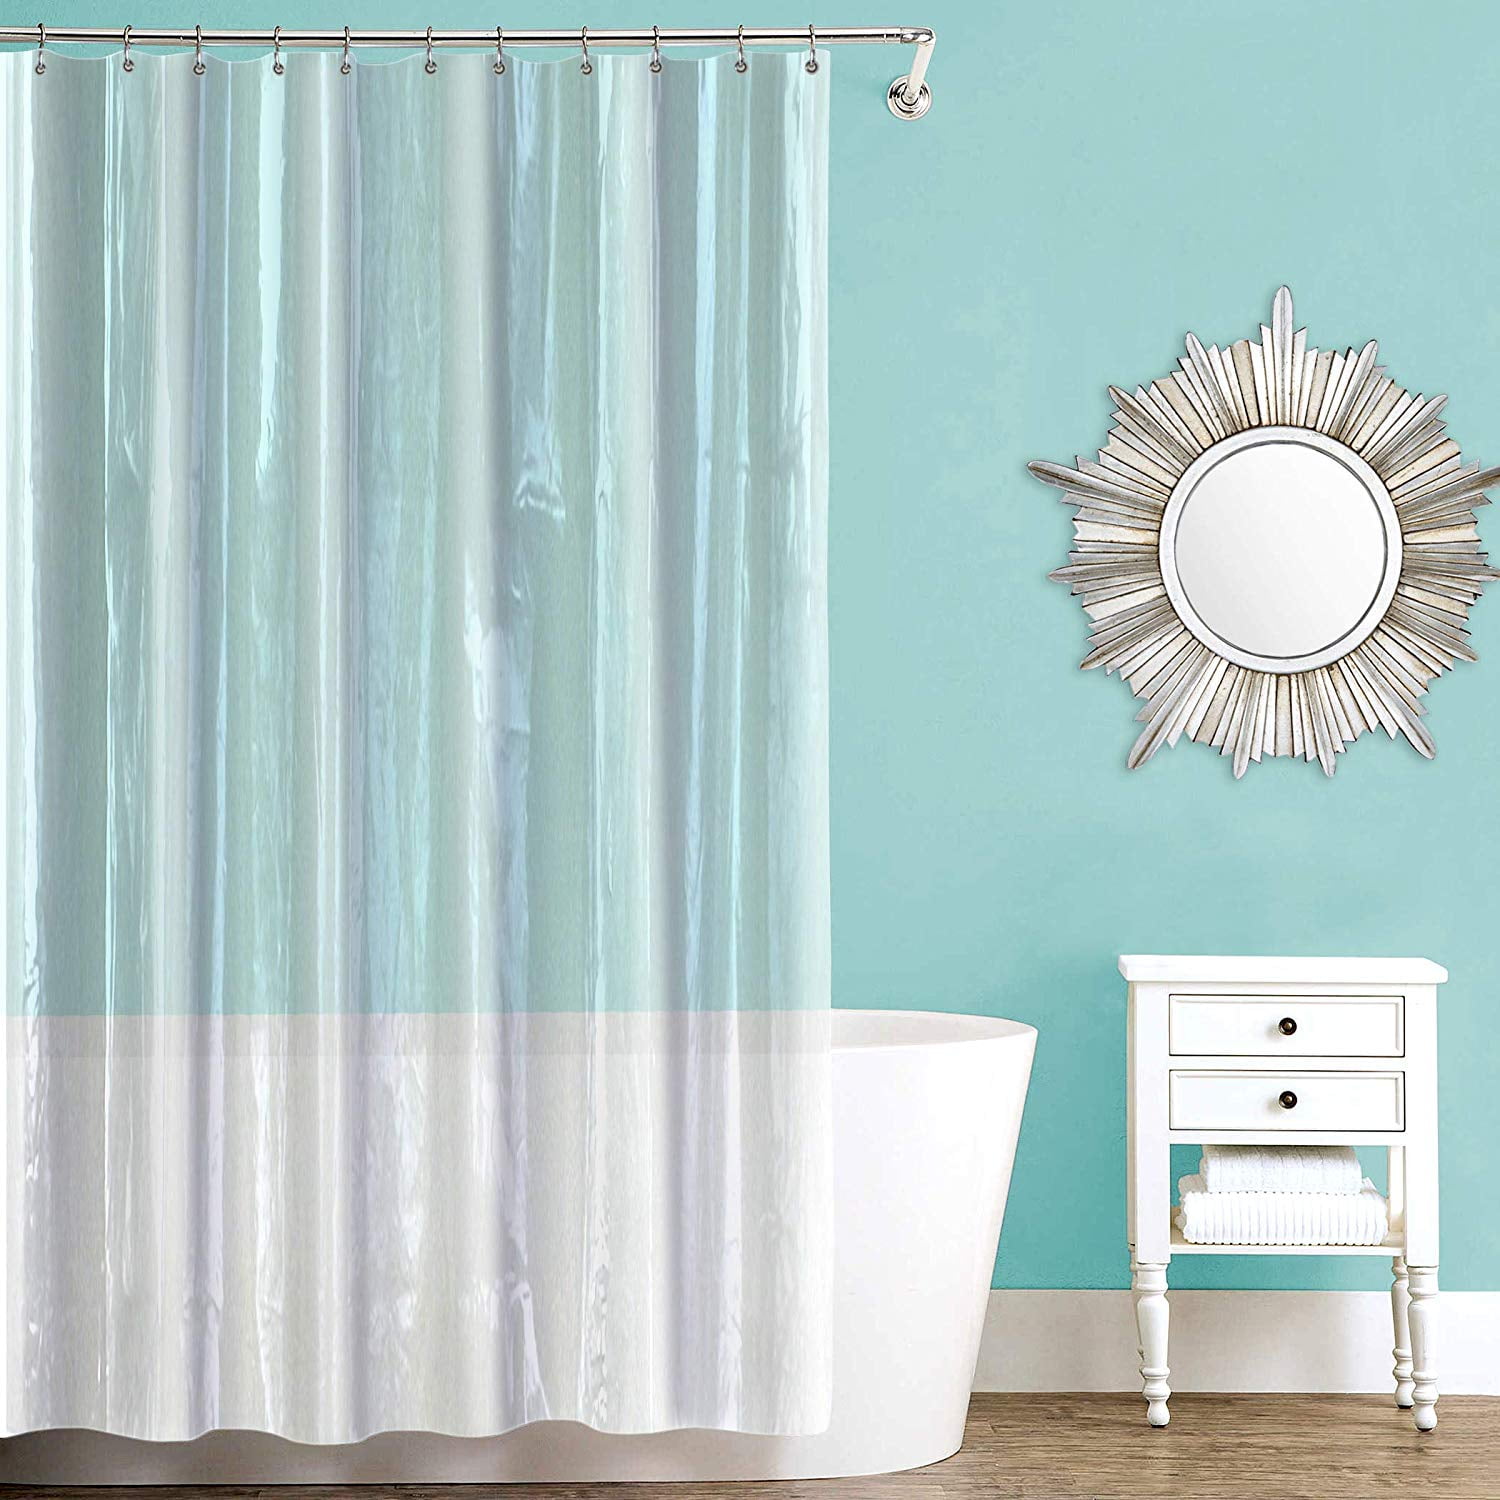 Home Waterproof Mold Mildew Resistant, How Do You Clean A Vinyl Shower Curtain Liner